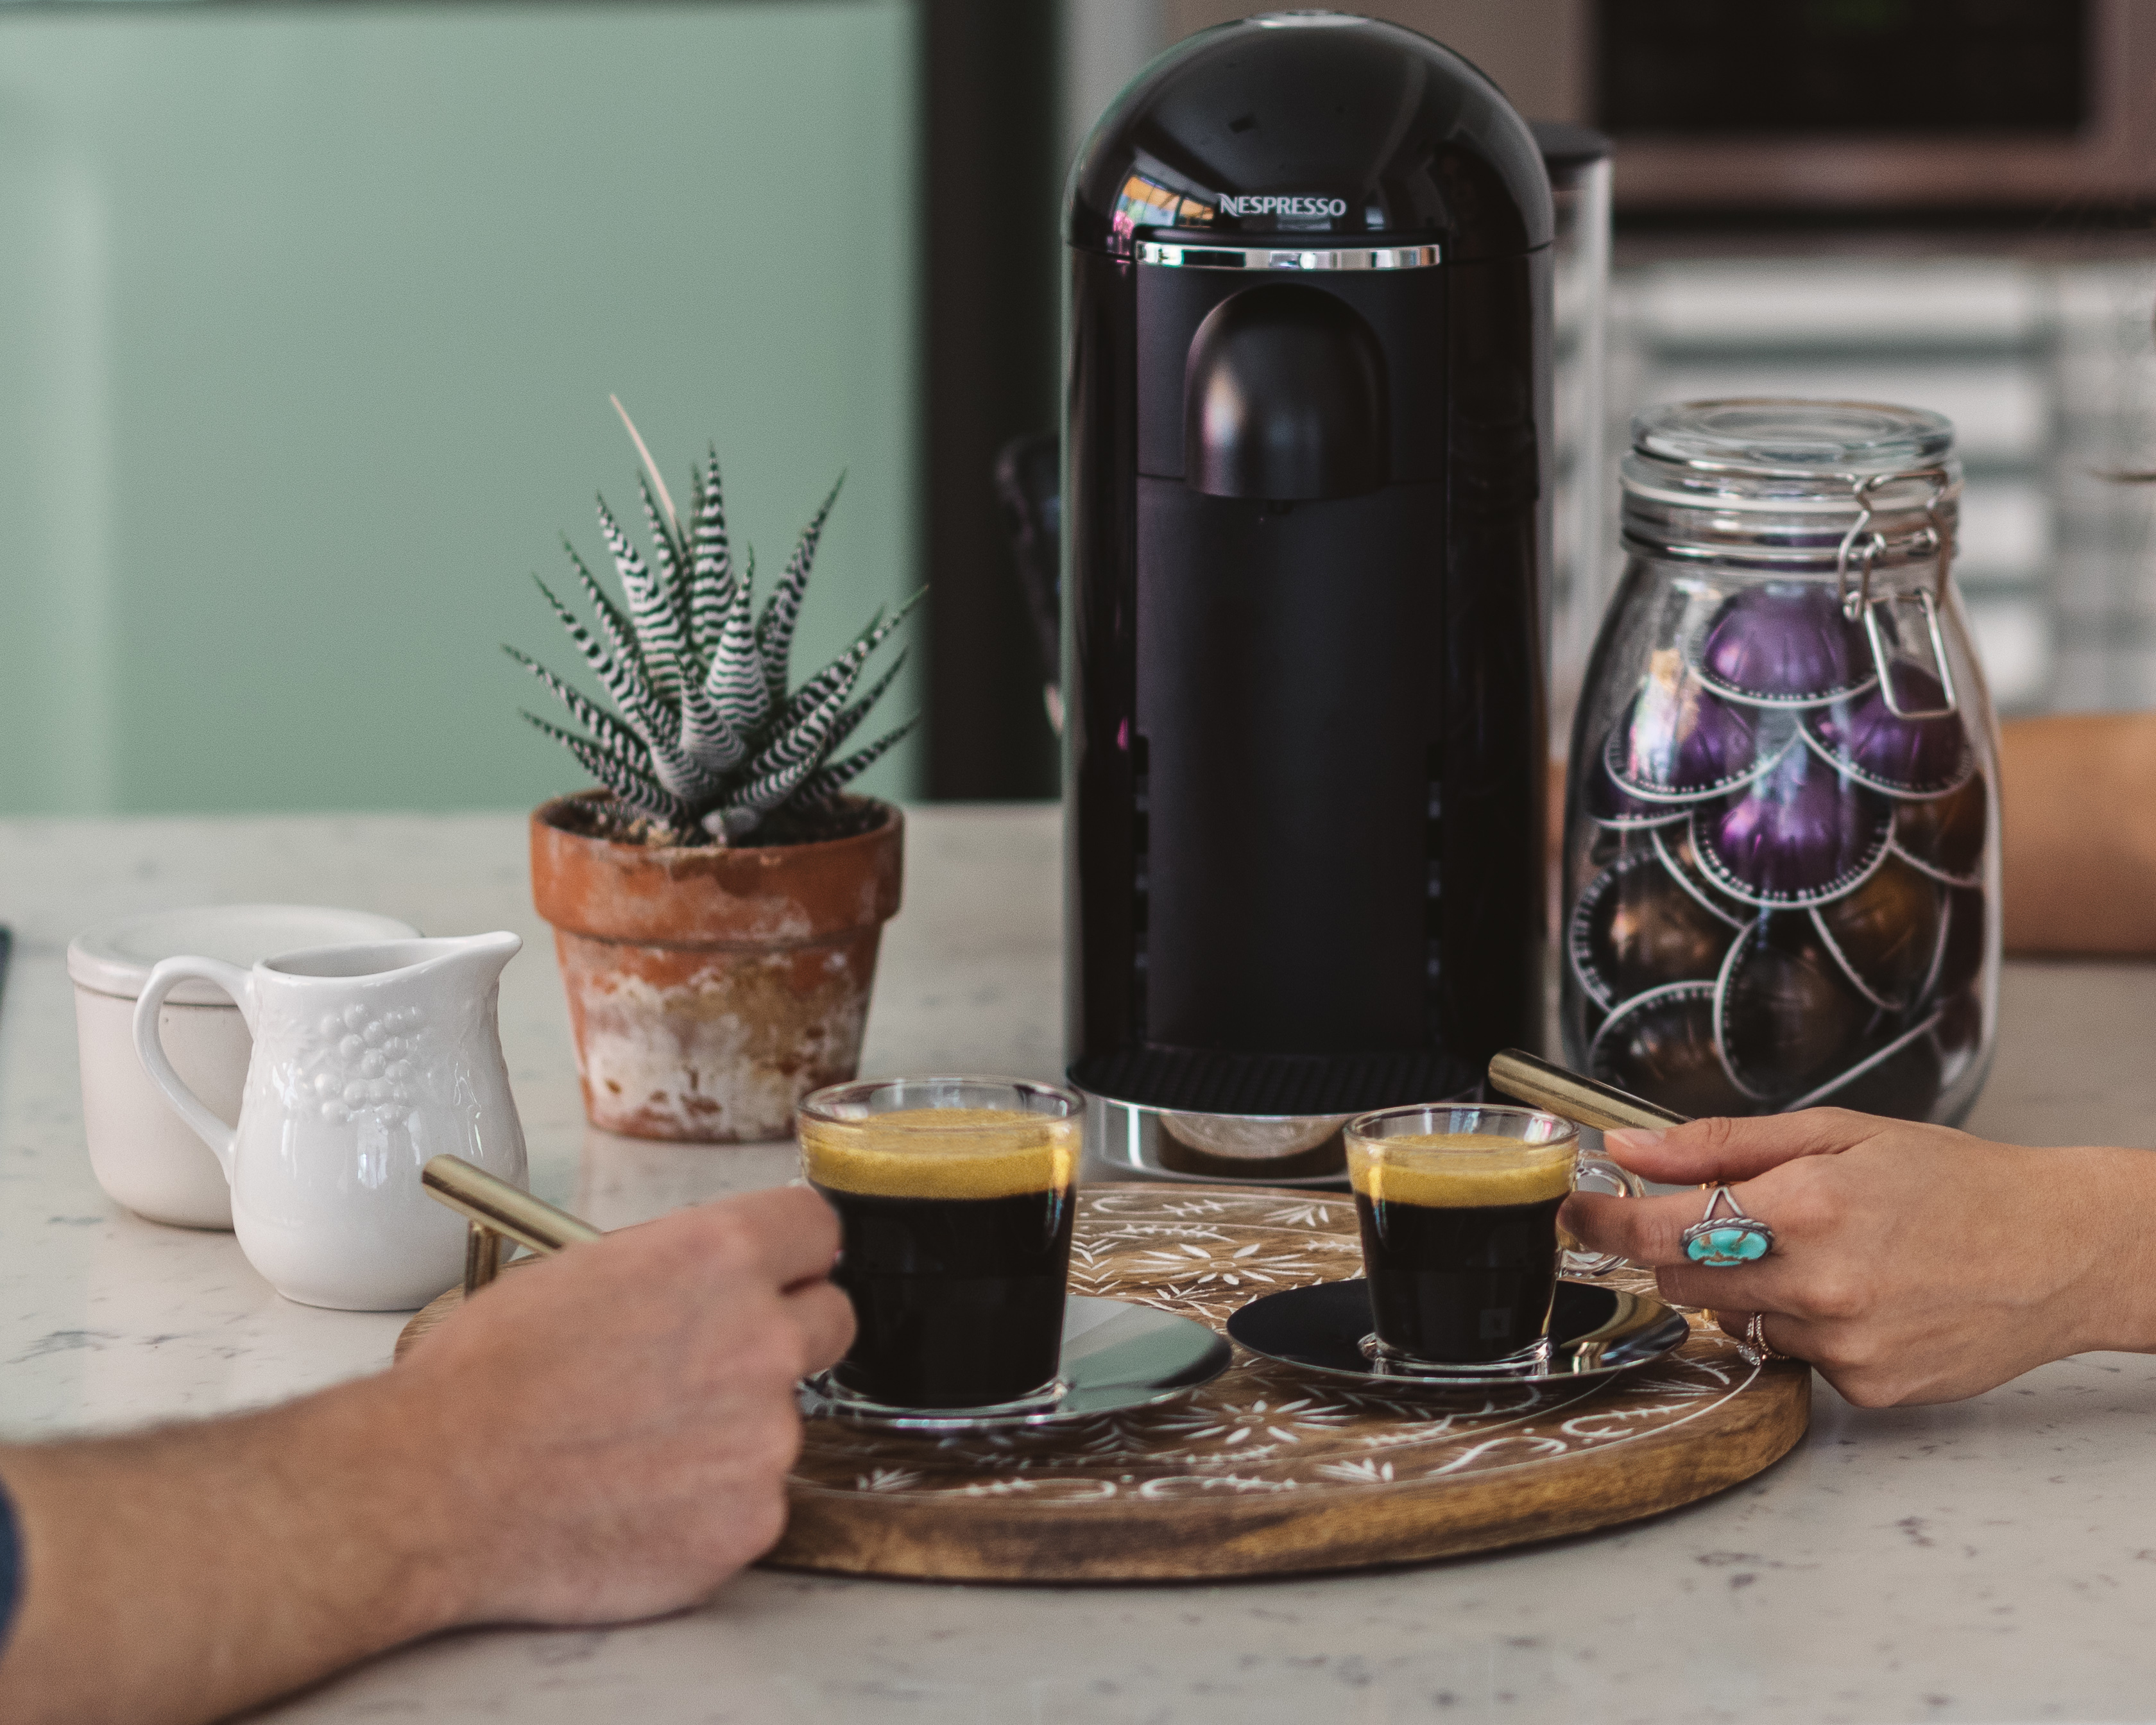 Lifestyle blogger Devin McGovern and wife Marlene Martinez morning coffee with Nespresso